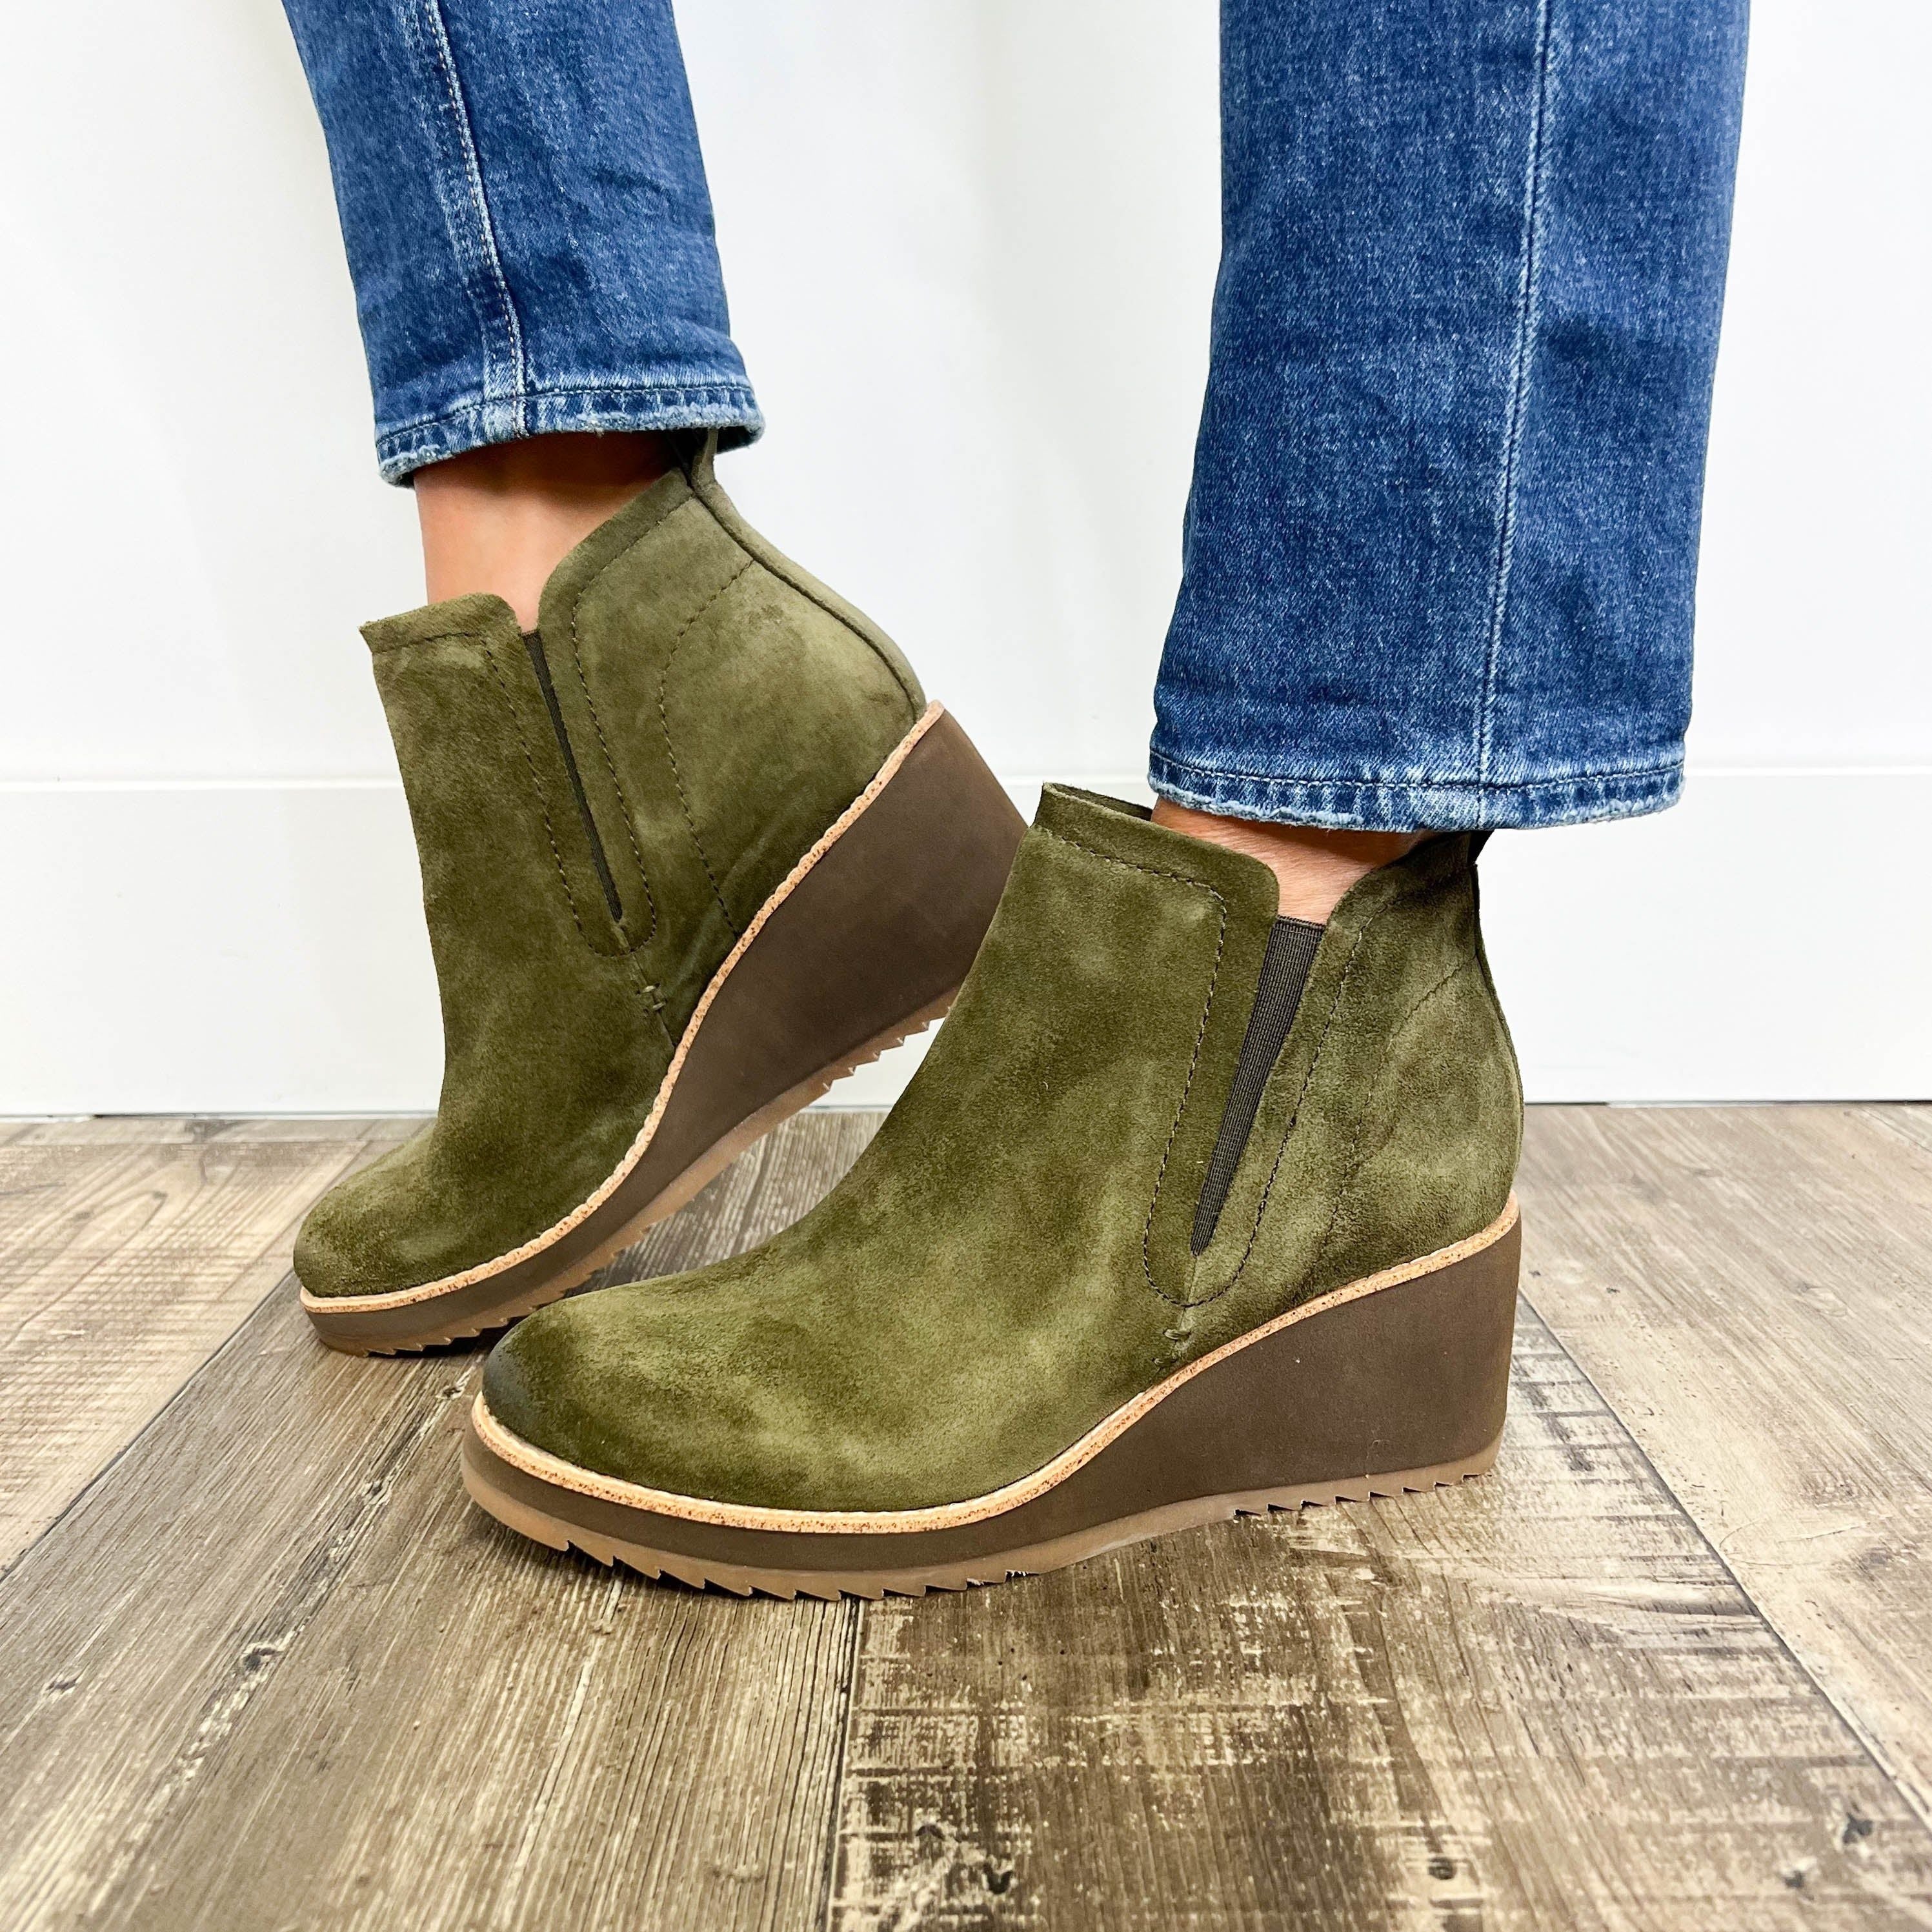 Sofft - Emeree Boots in Fern - Arktana - Boots